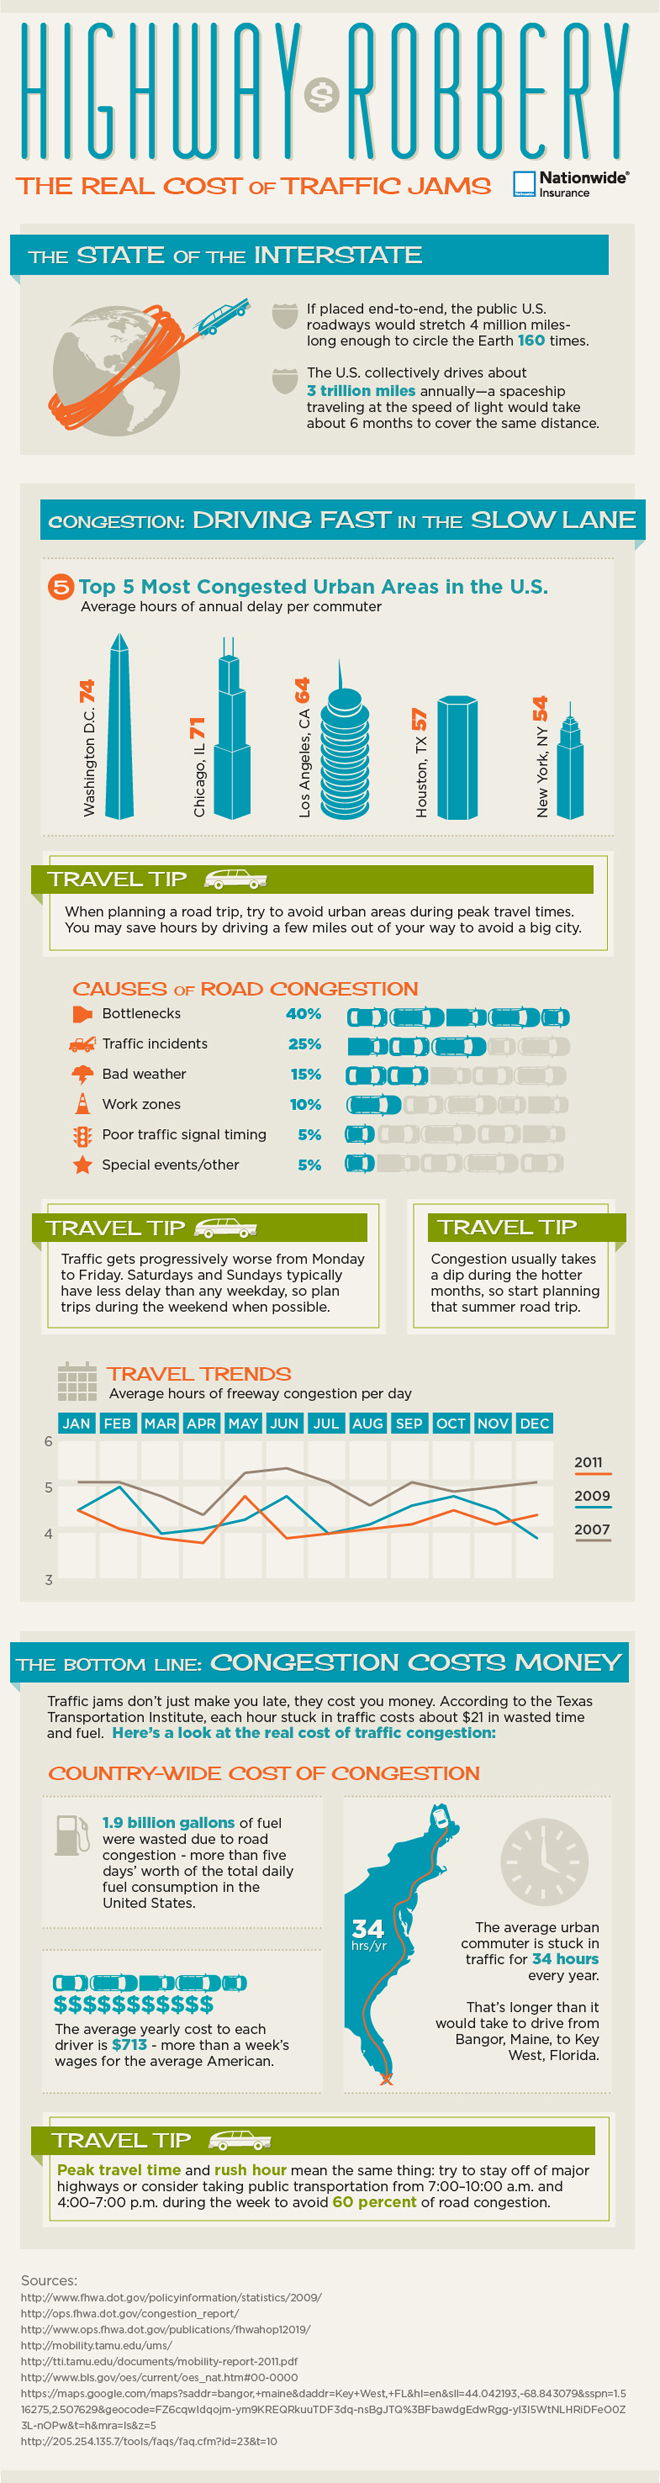 Find out the real cost of traffic jams with these traffic congestion statistics.